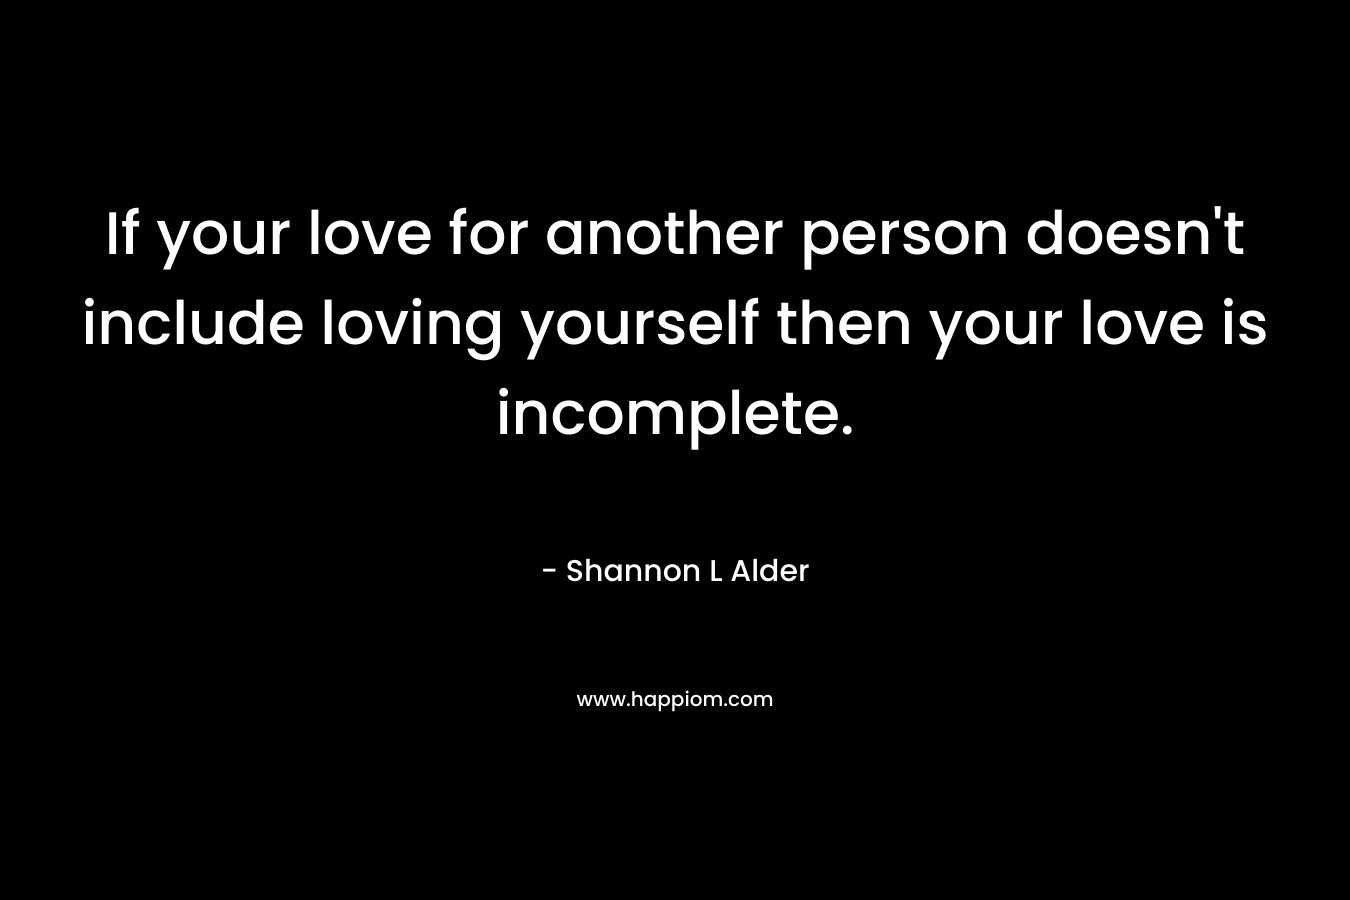 If your love for another person doesn’t include loving yourself then your love is incomplete. – Shannon L Alder